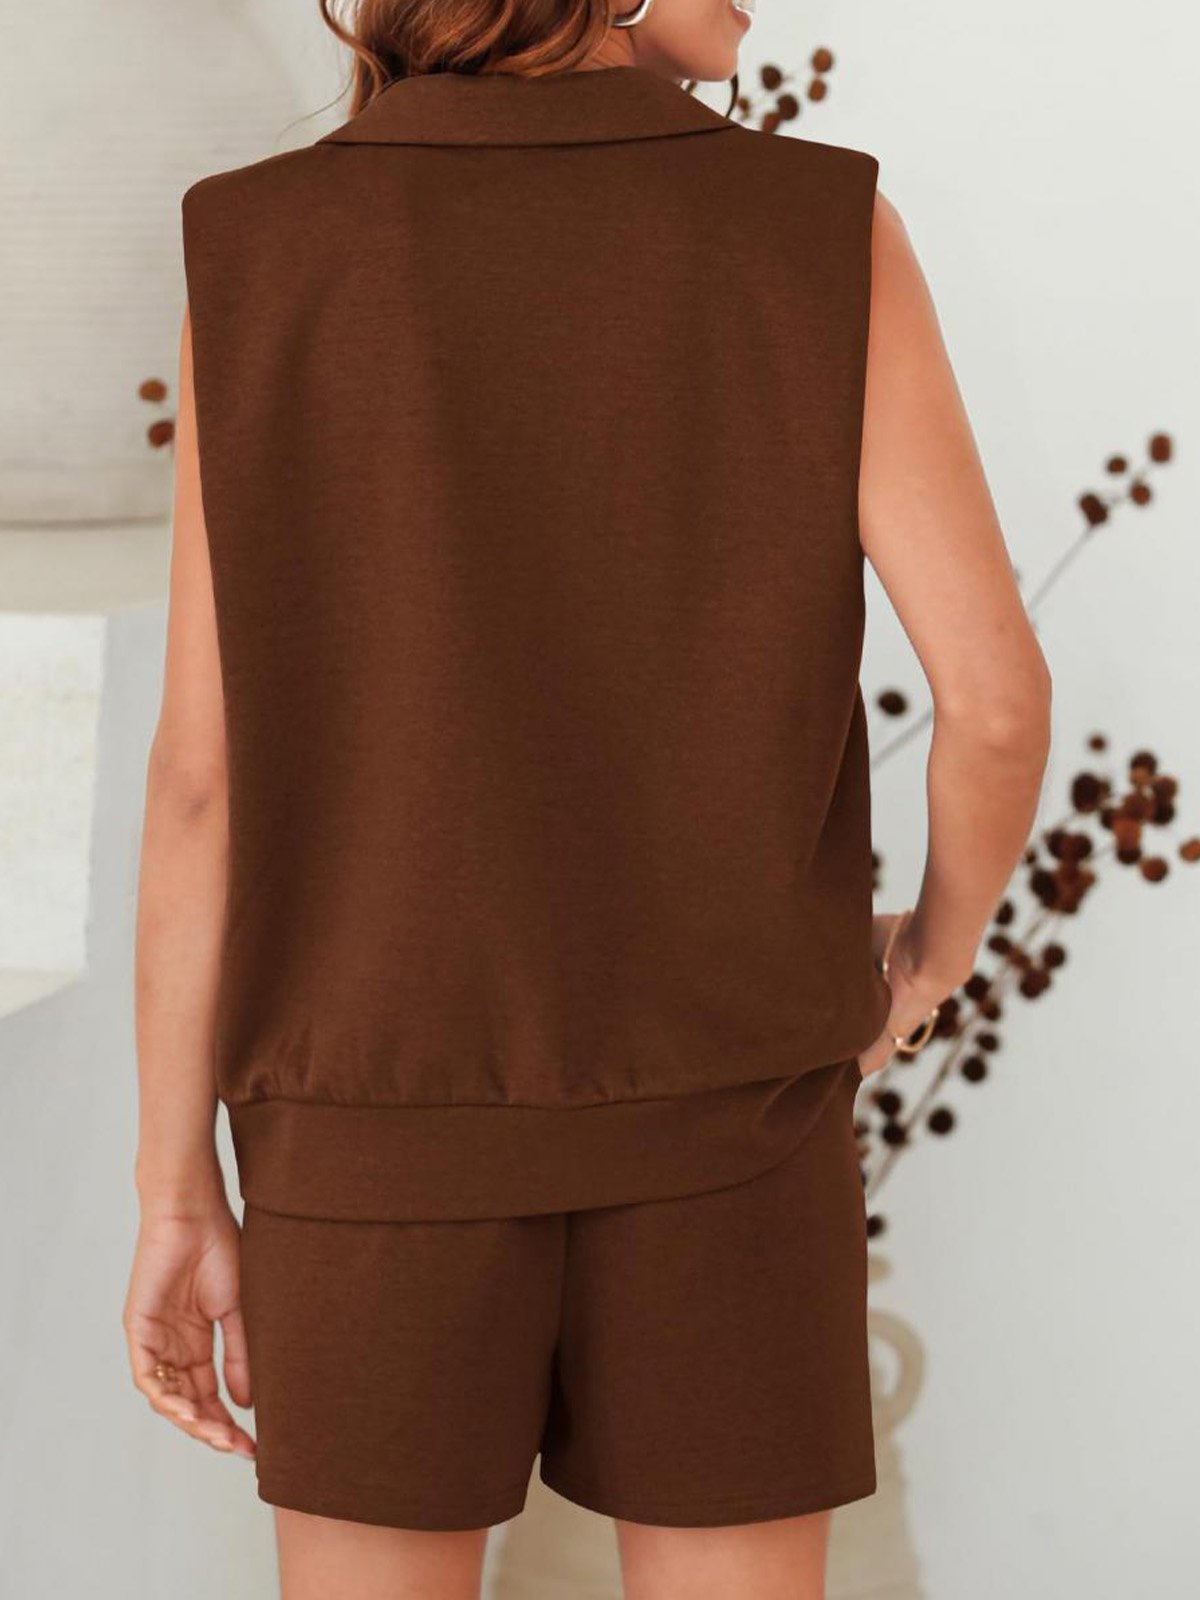 Women Plain V Neck Short Sleeve Comfy Casual Top With Pants Two-Piece Set